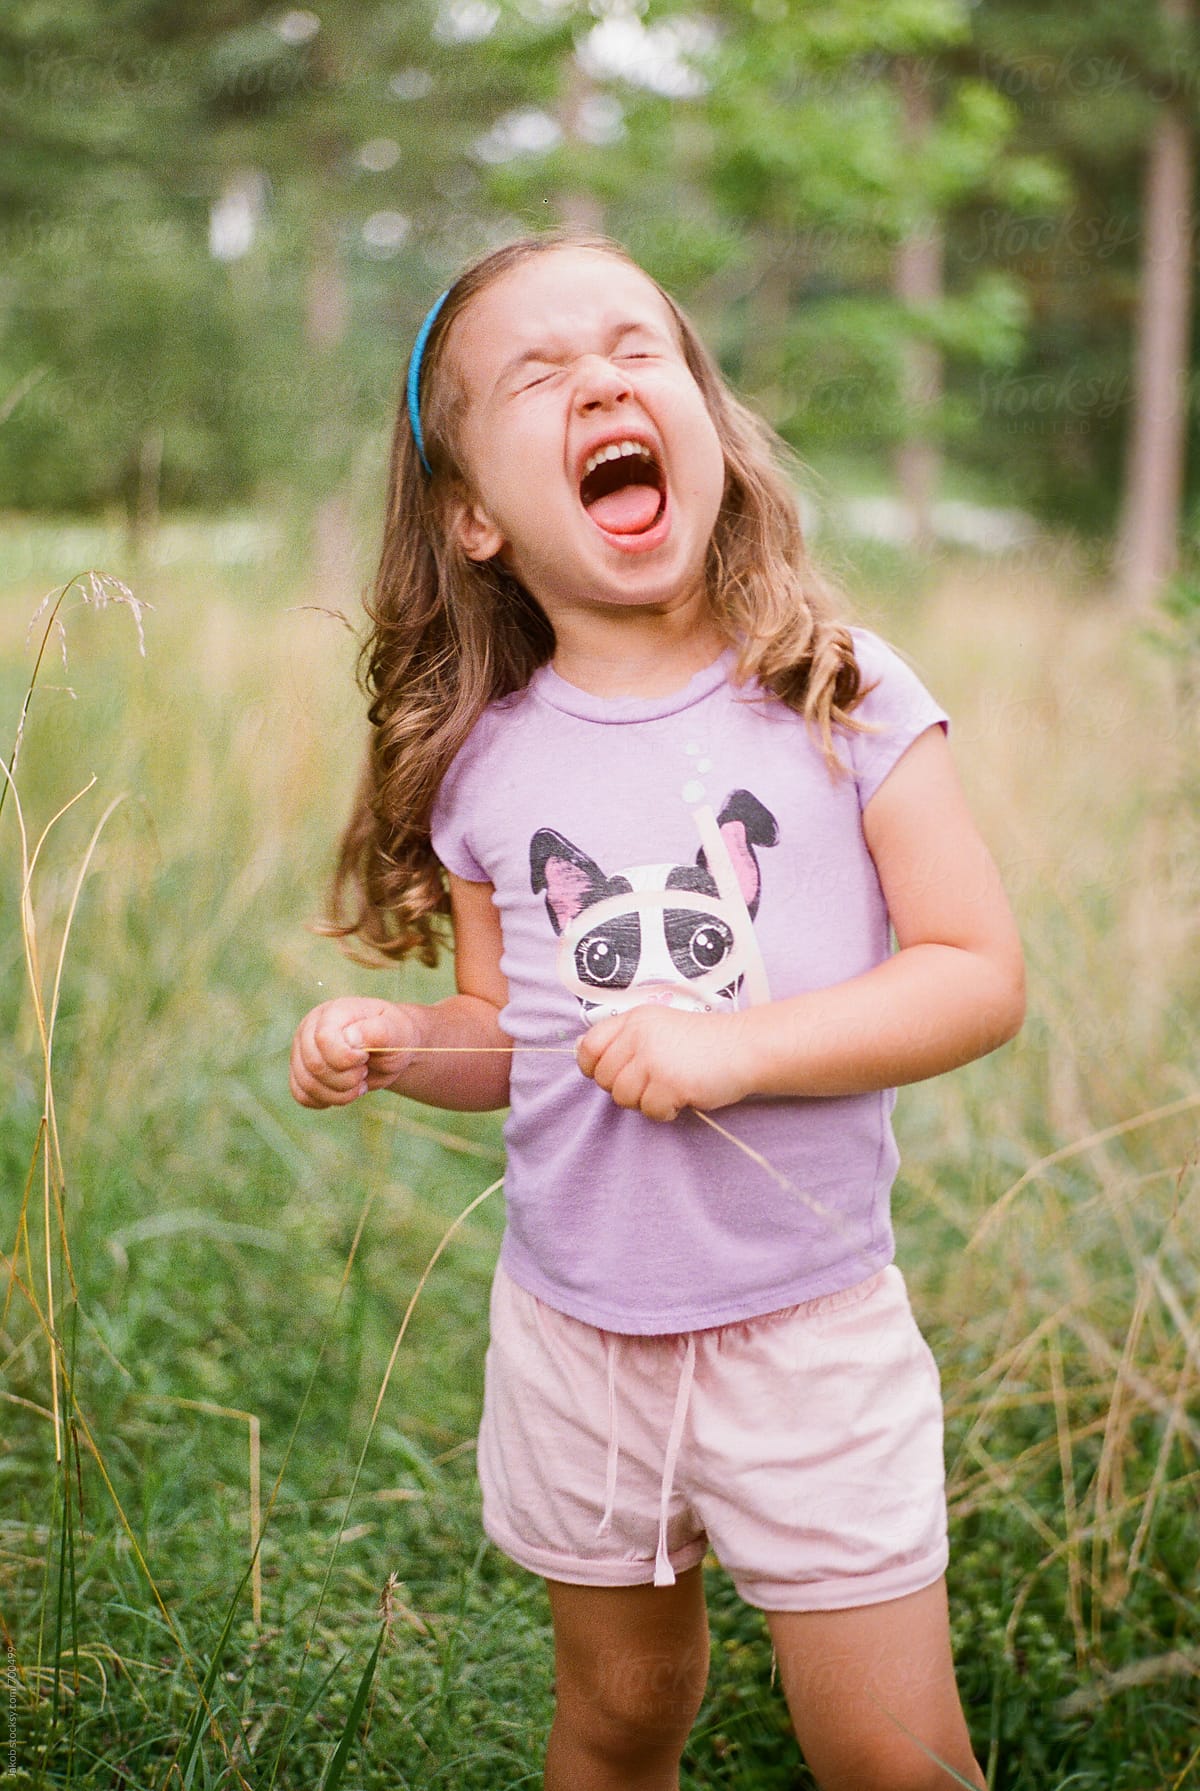 Cute Young Girl Making A Funny Face In A Field By Jakob Lagerstedt